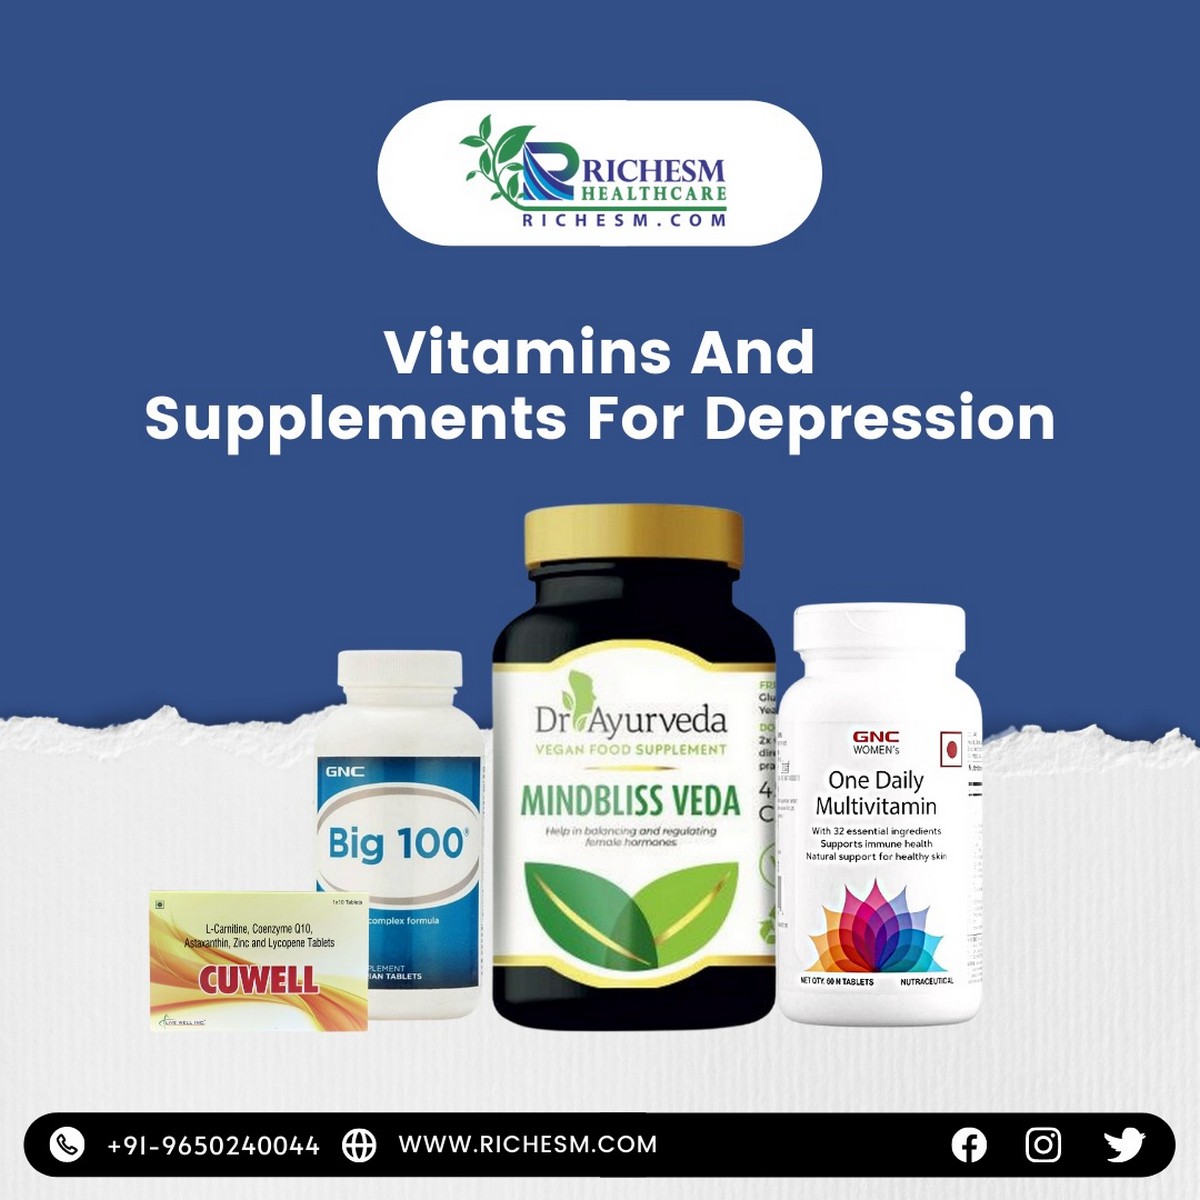 Vitamins And Supplements For Depression Health and Nutrition Vitamins And Supplements For Depression